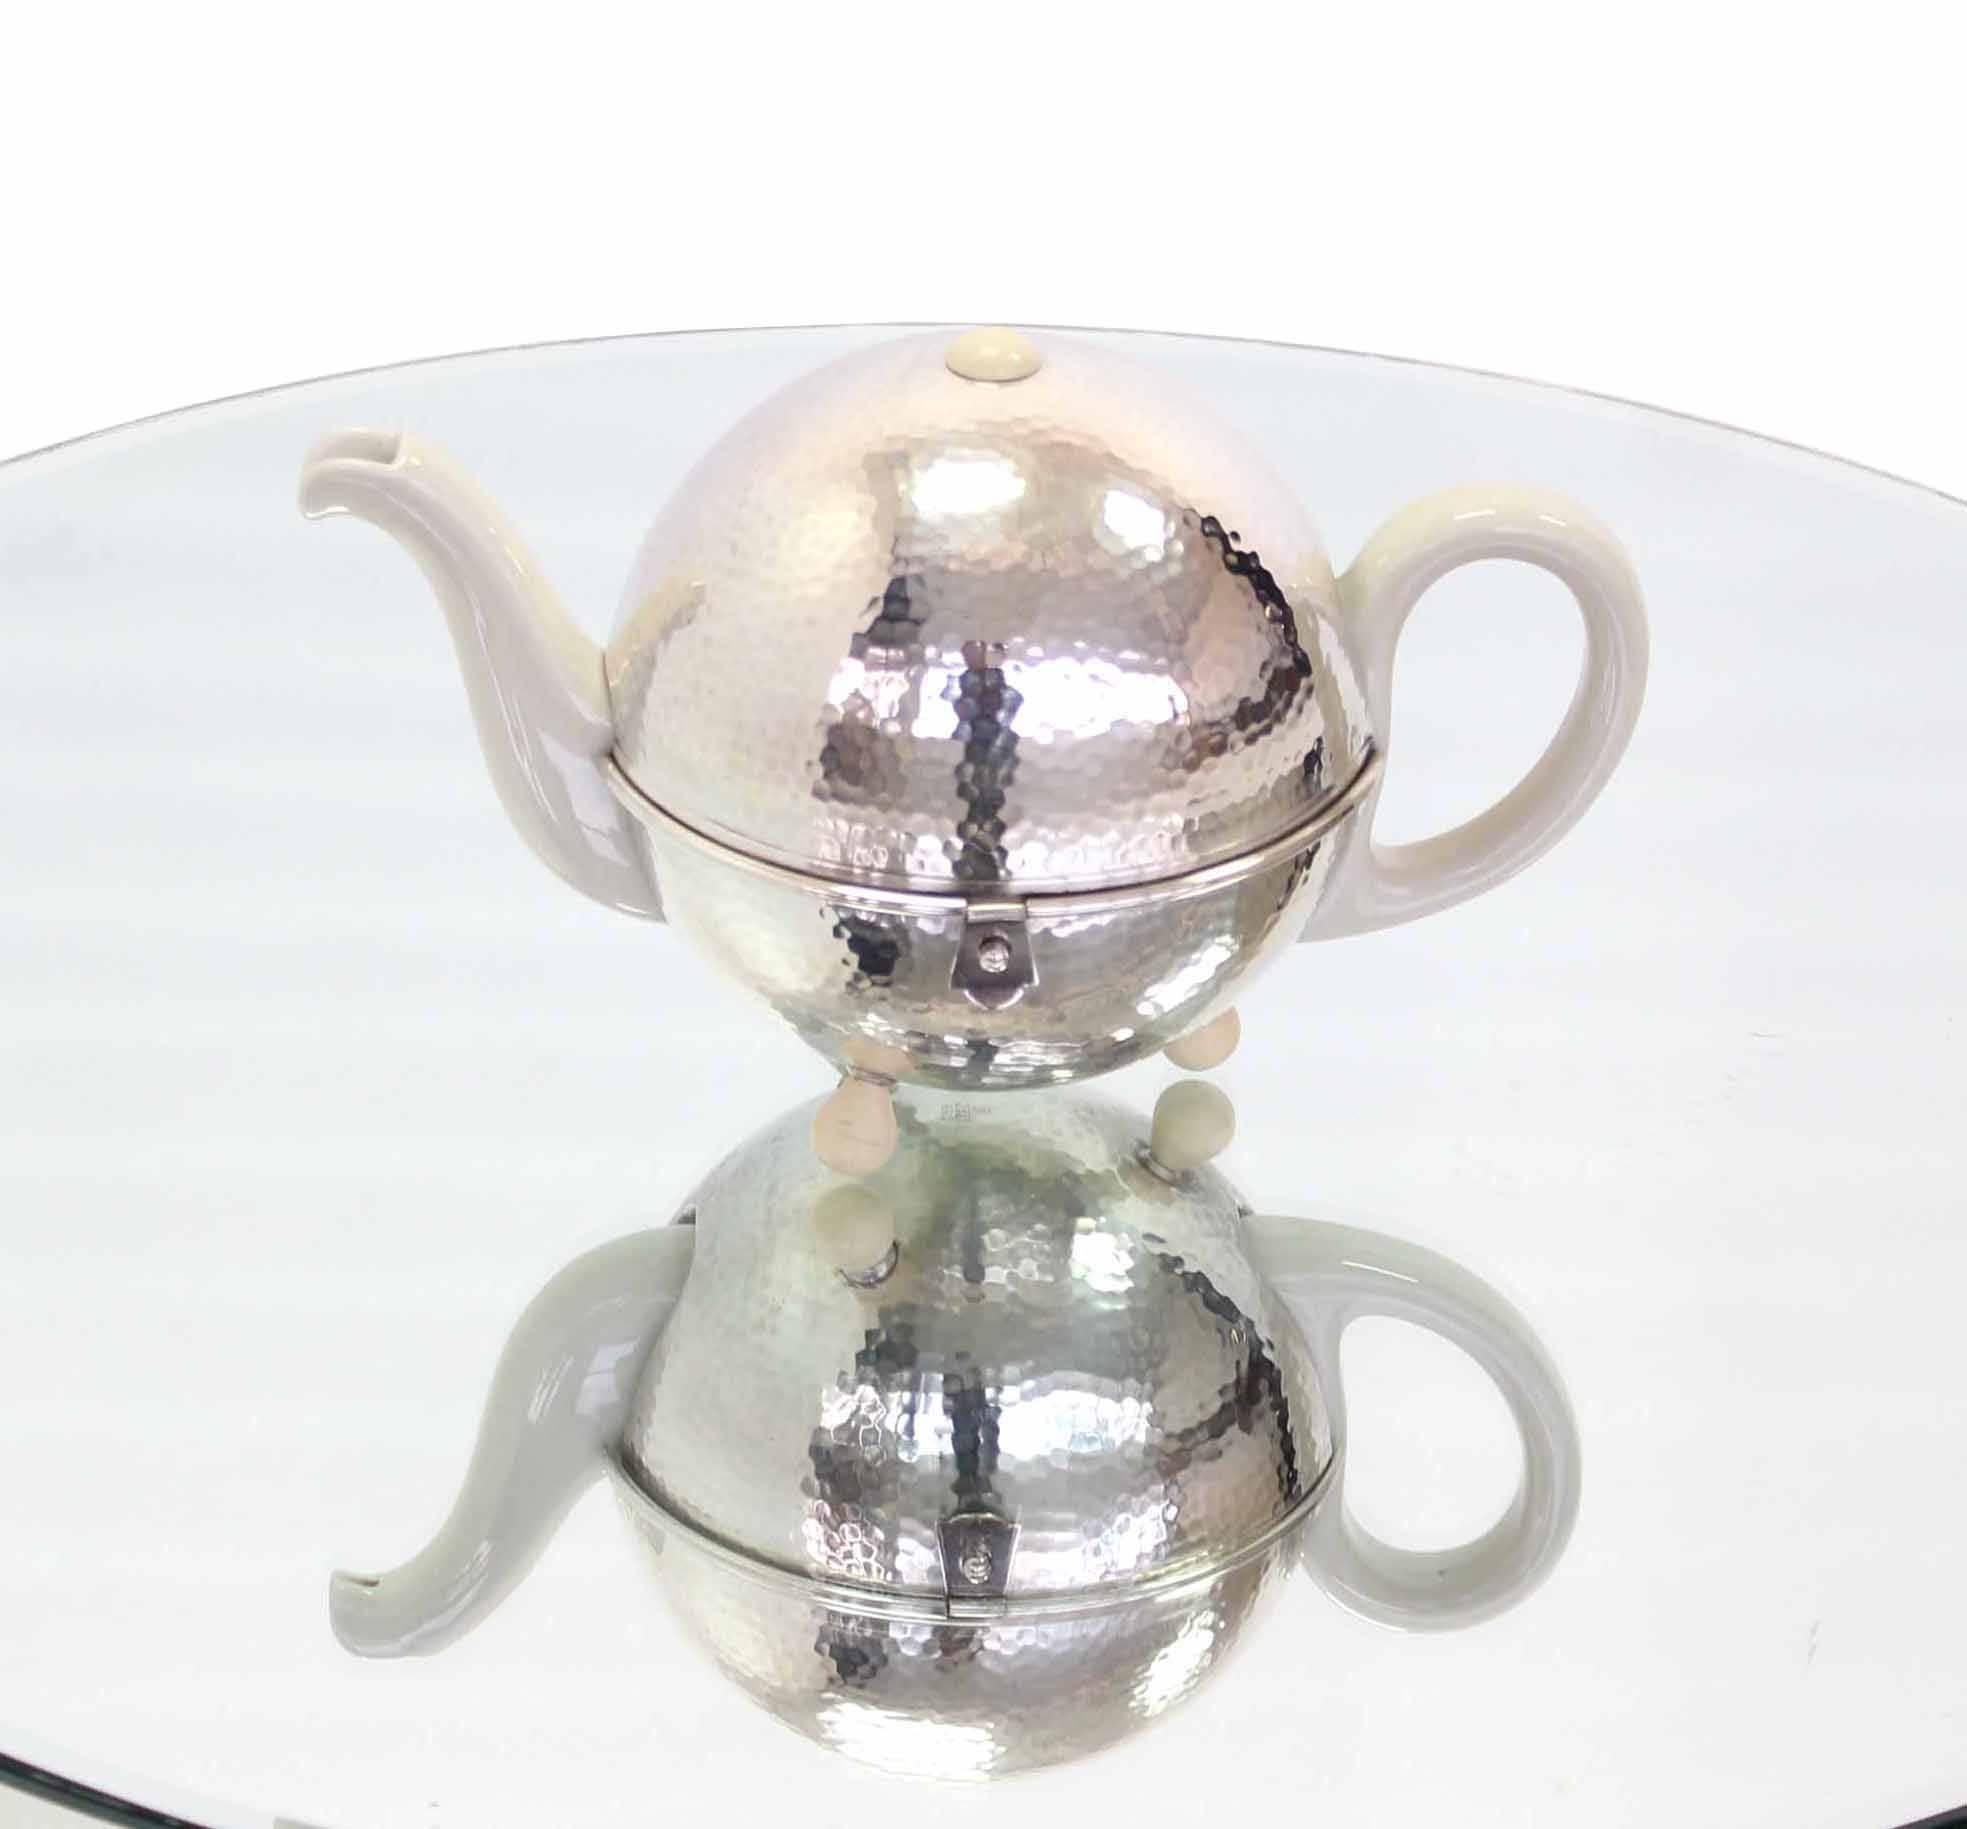 Silver Plate WMF Porcelain Tea Pot in Hammered Metal Insulated Cover